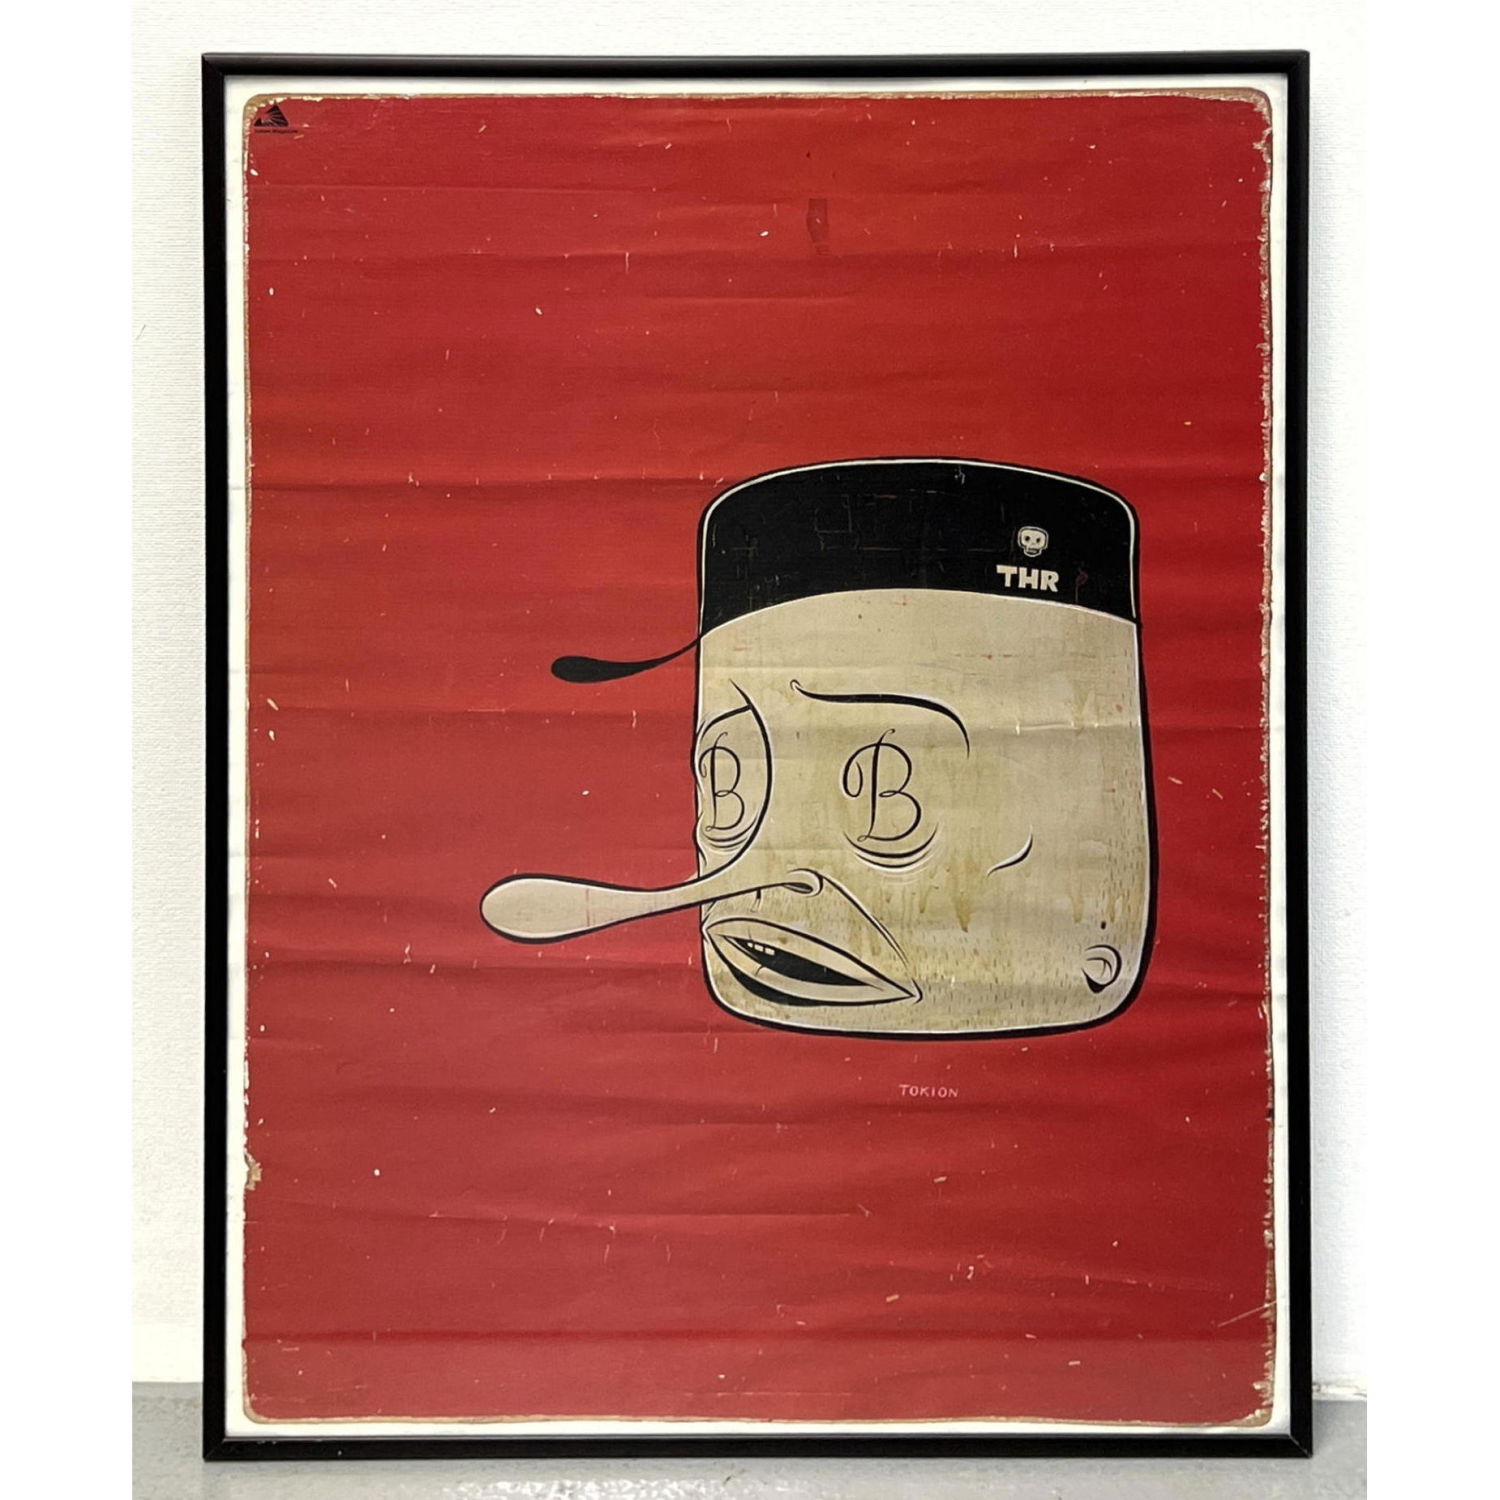 BARRY MCGEE "Tokion" Offset Lithograph